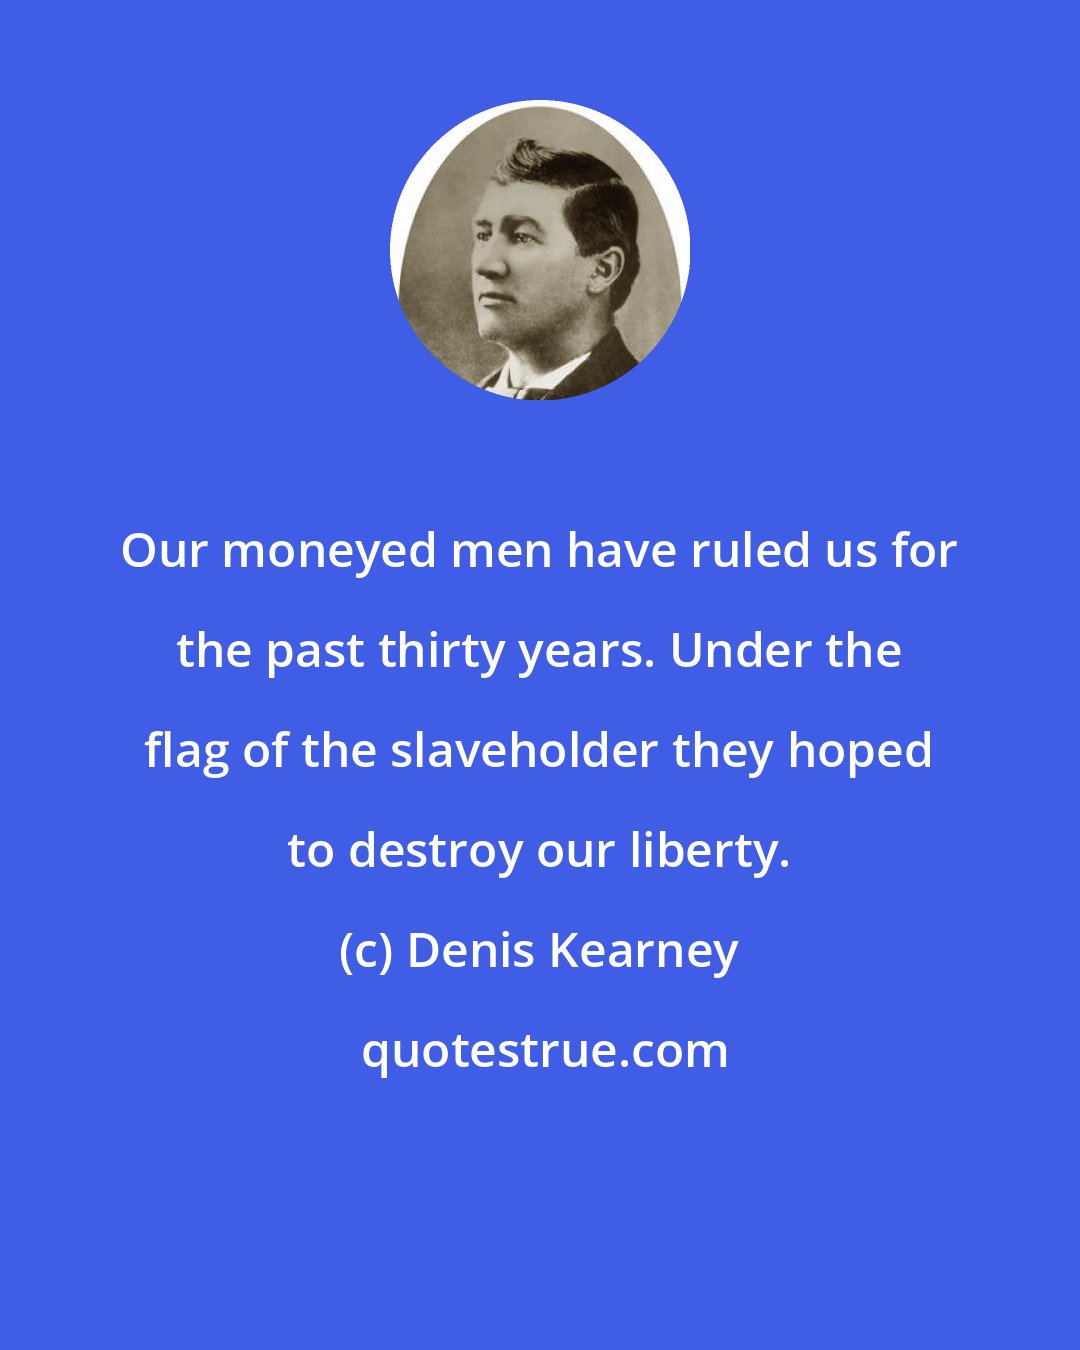 Denis Kearney: Our moneyed men have ruled us for the past thirty years. Under the flag of the slaveholder they hoped to destroy our liberty.